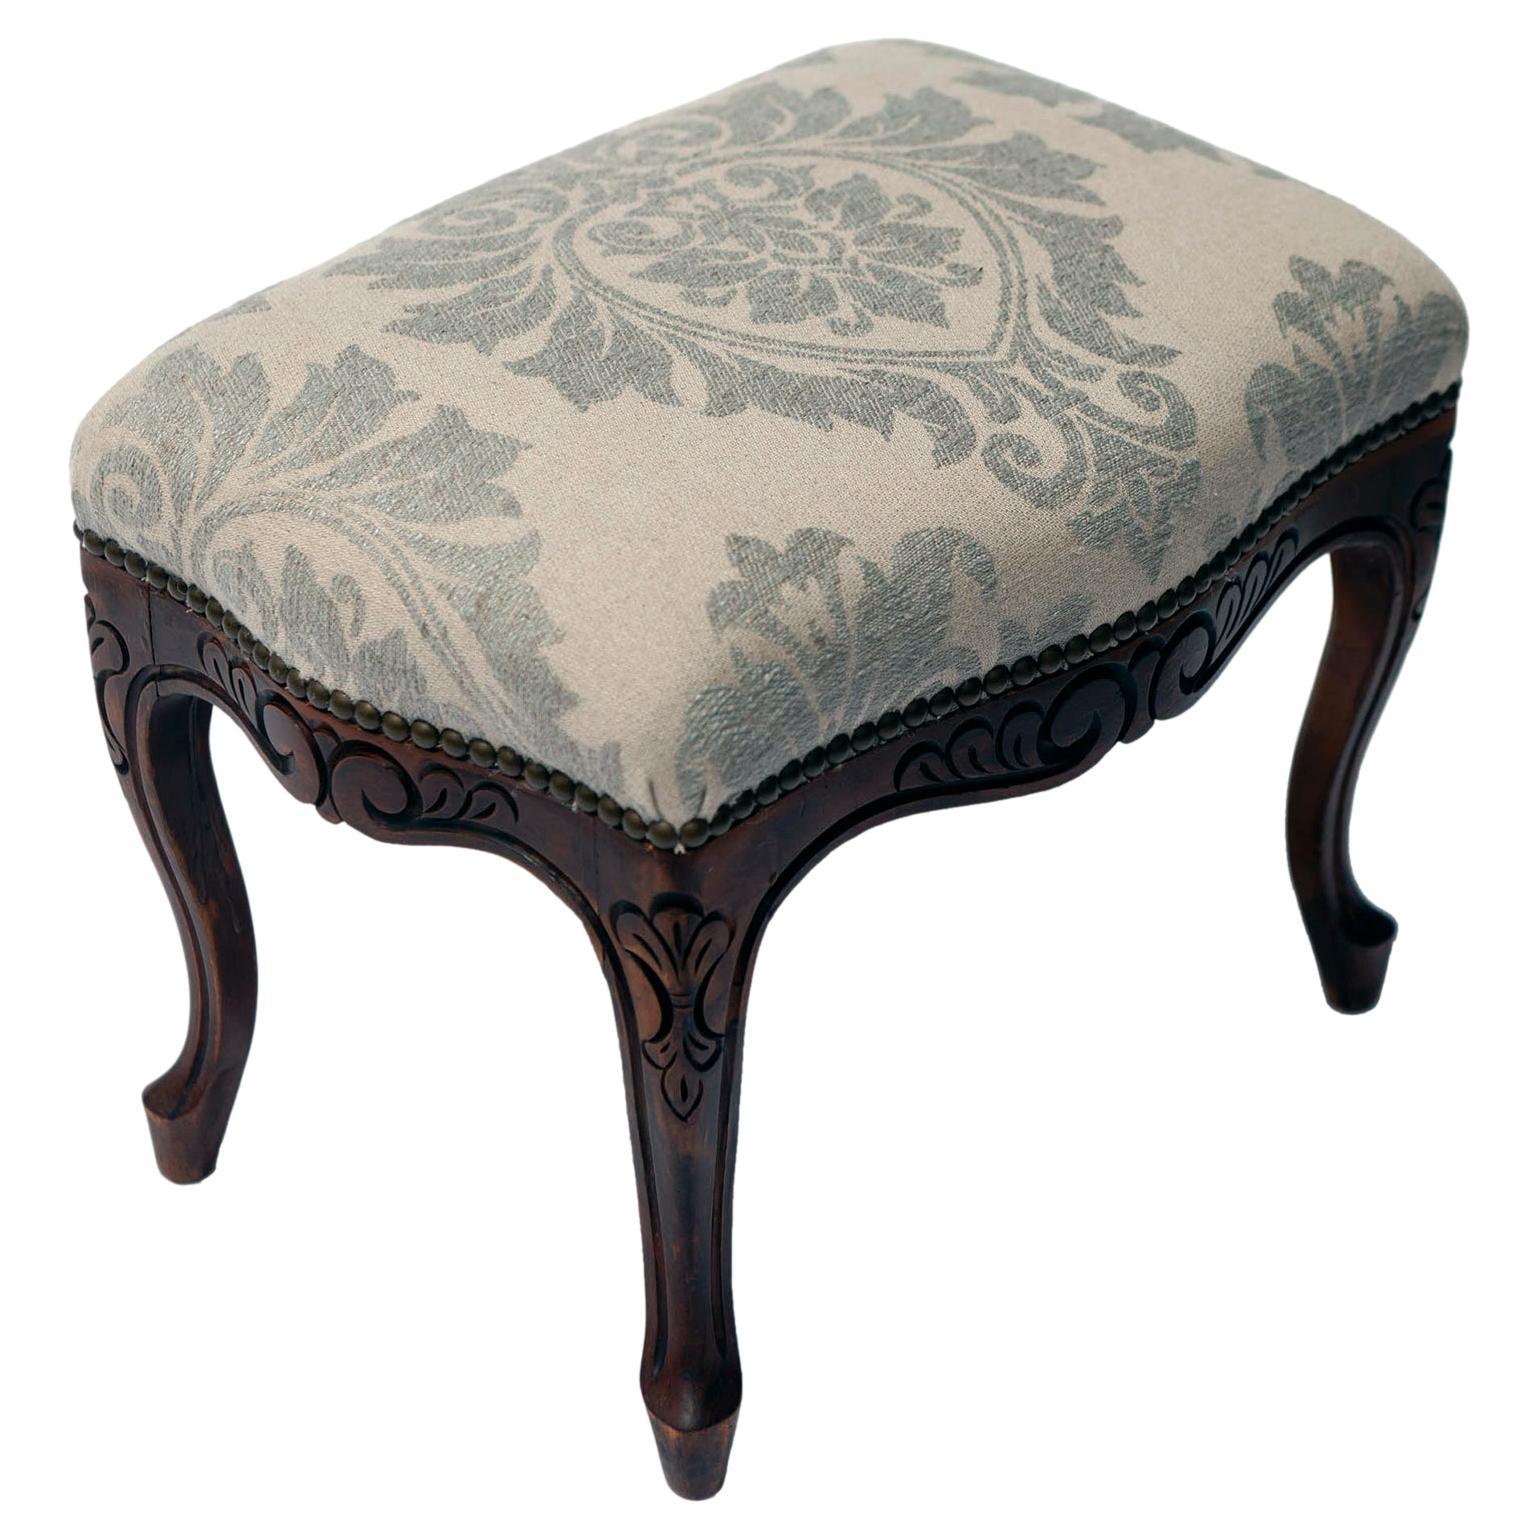 Vintage French style Handcarved footstool upholstered in fine Italian linen wool blend. The stool is finished with antiqued brass nailheads.
